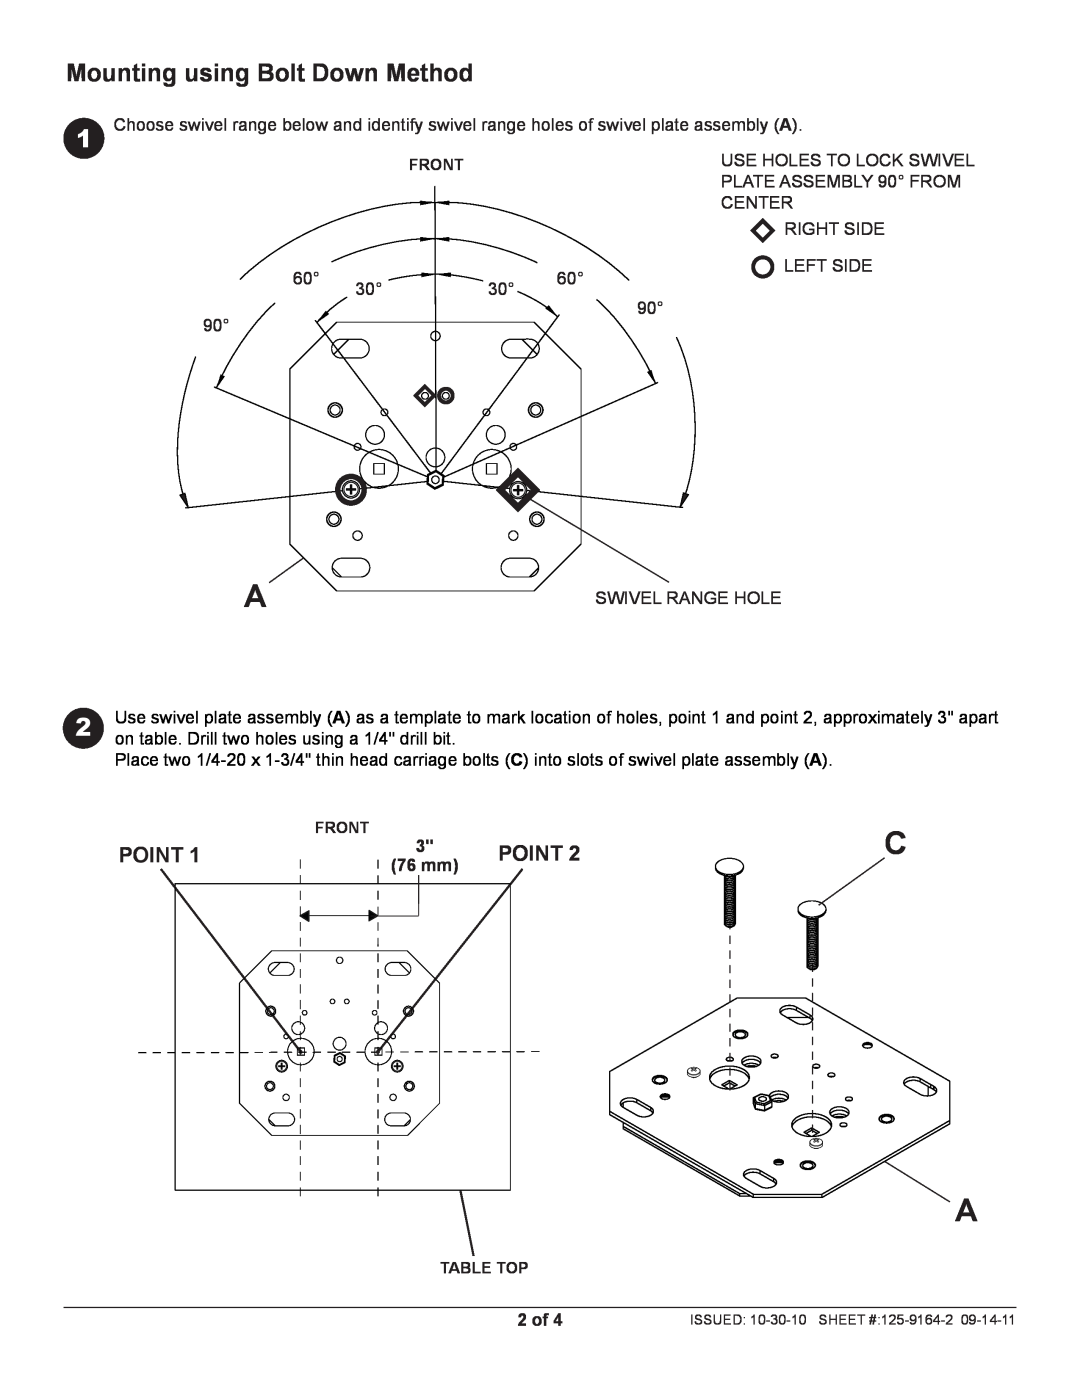 Peerless Industries HLG440-PH-Q10 instruction sheet Point, 76 mm, 2 of, Mounting using Bolt Down Method 